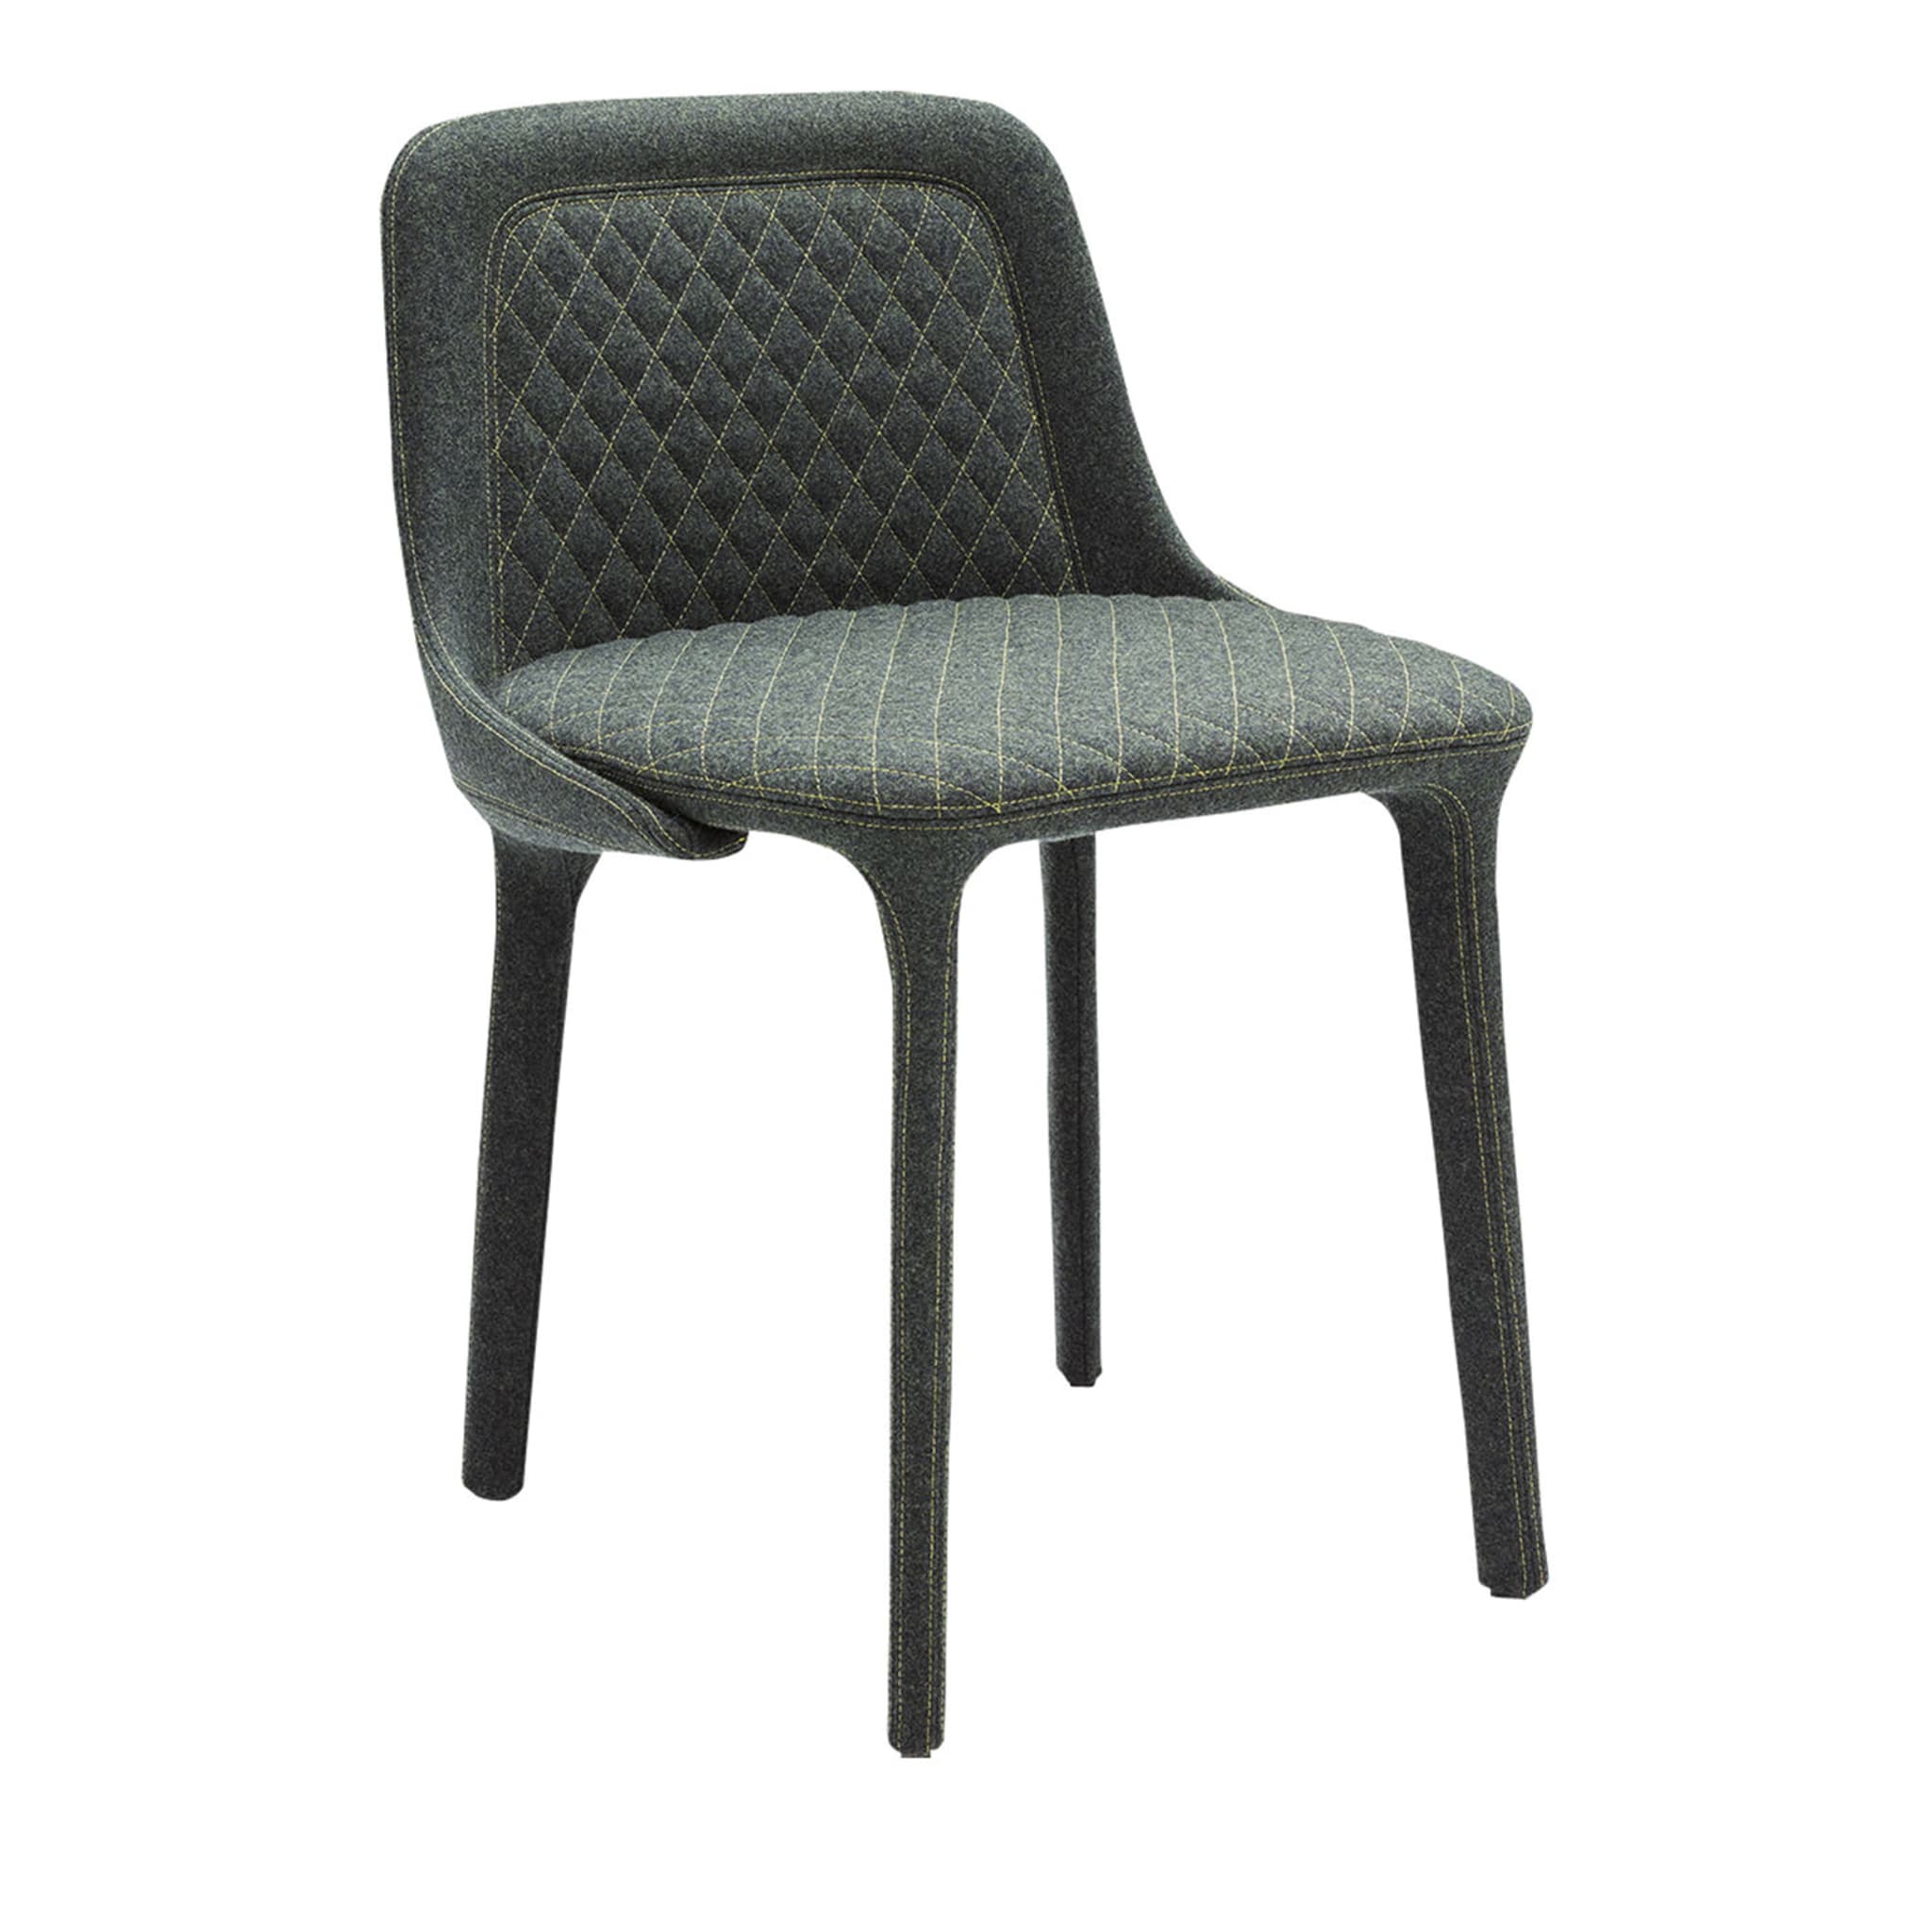 Lepel Green Quilted Chair by Luca Nichetto - Main view